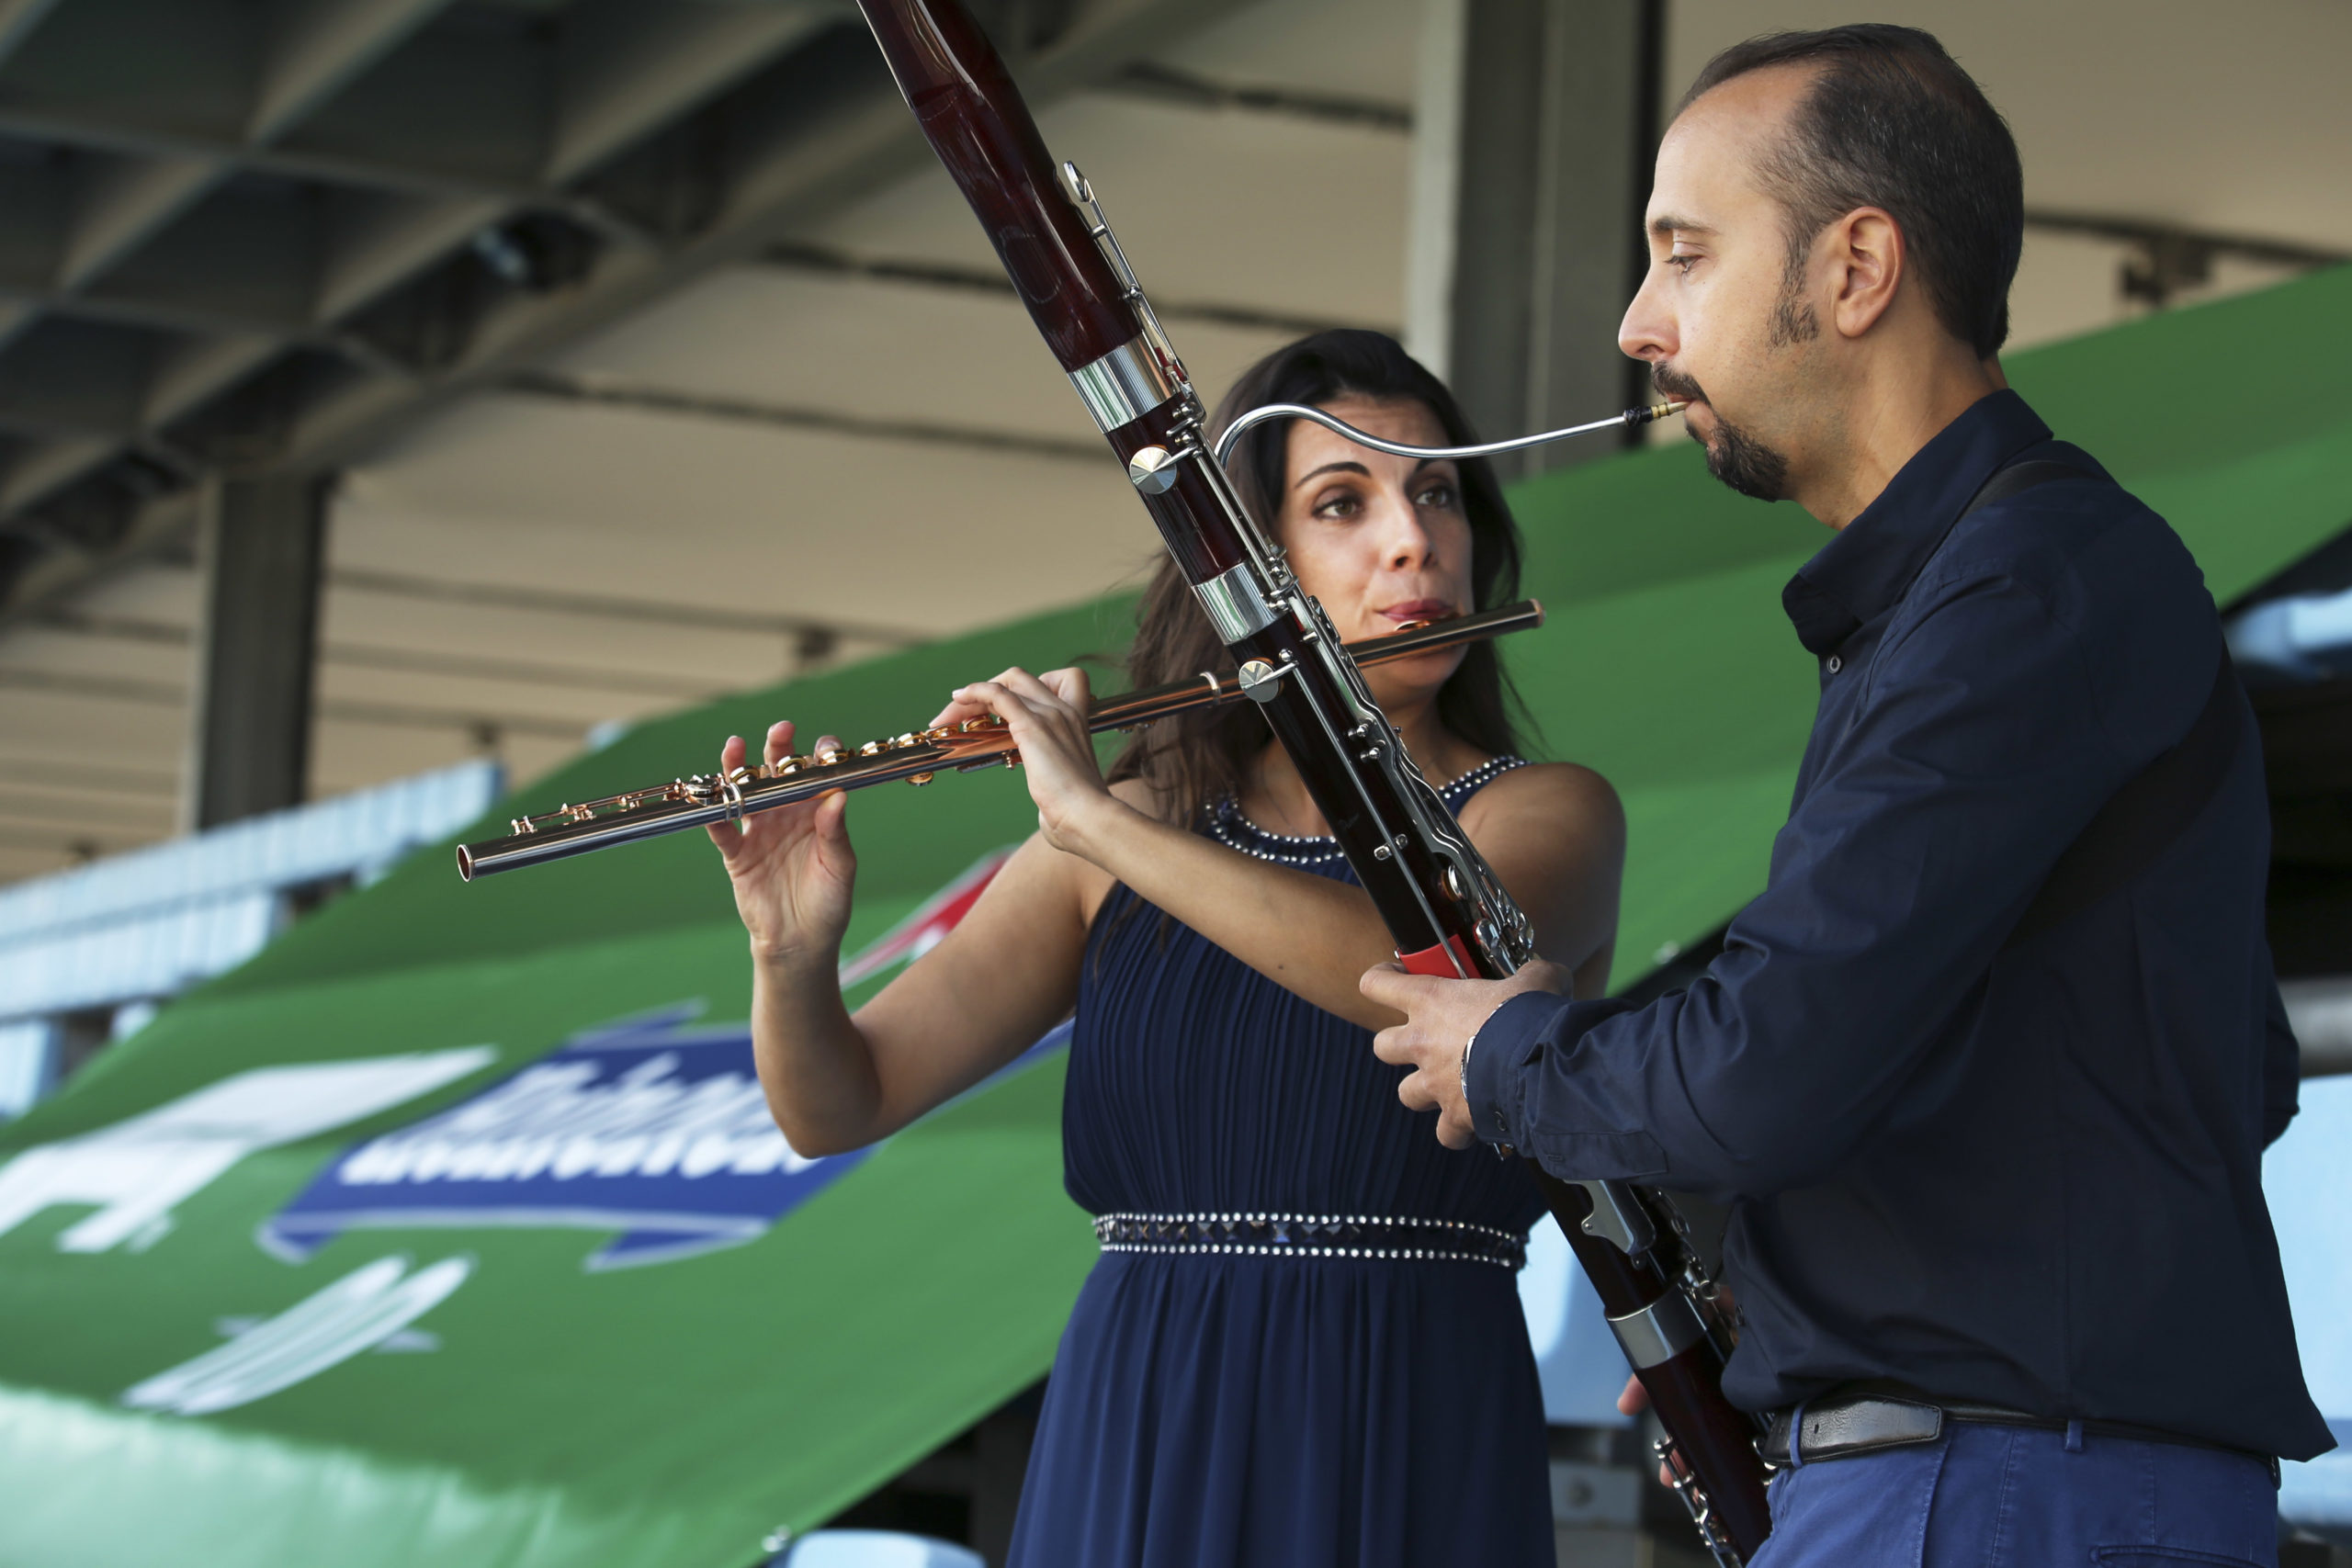 Claudia Bucchini and Andrea Zucco perform the National Anthem live in the grandstand